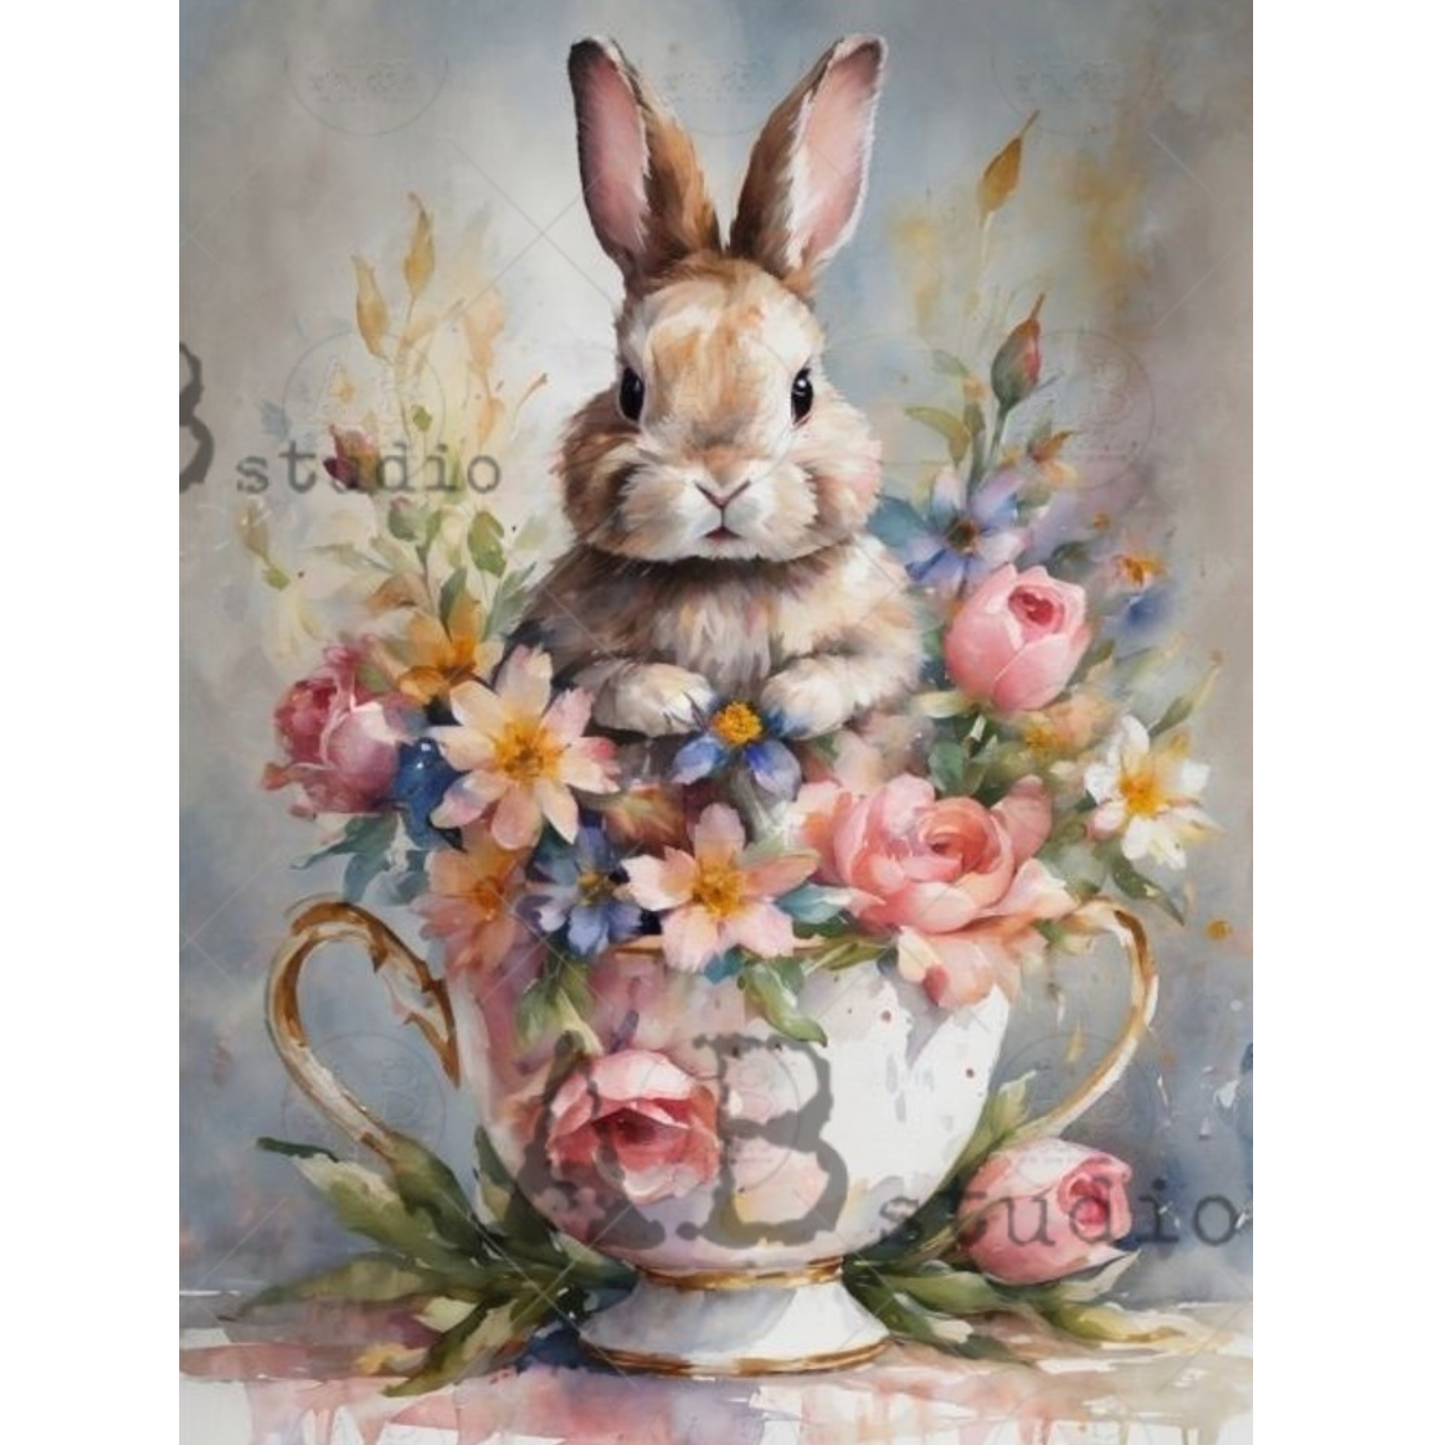 "Easter Bunny In A Teacup With Mixed Spring Florals" decoupage rice paper by AB Studio. Available at Milton's Daughter.